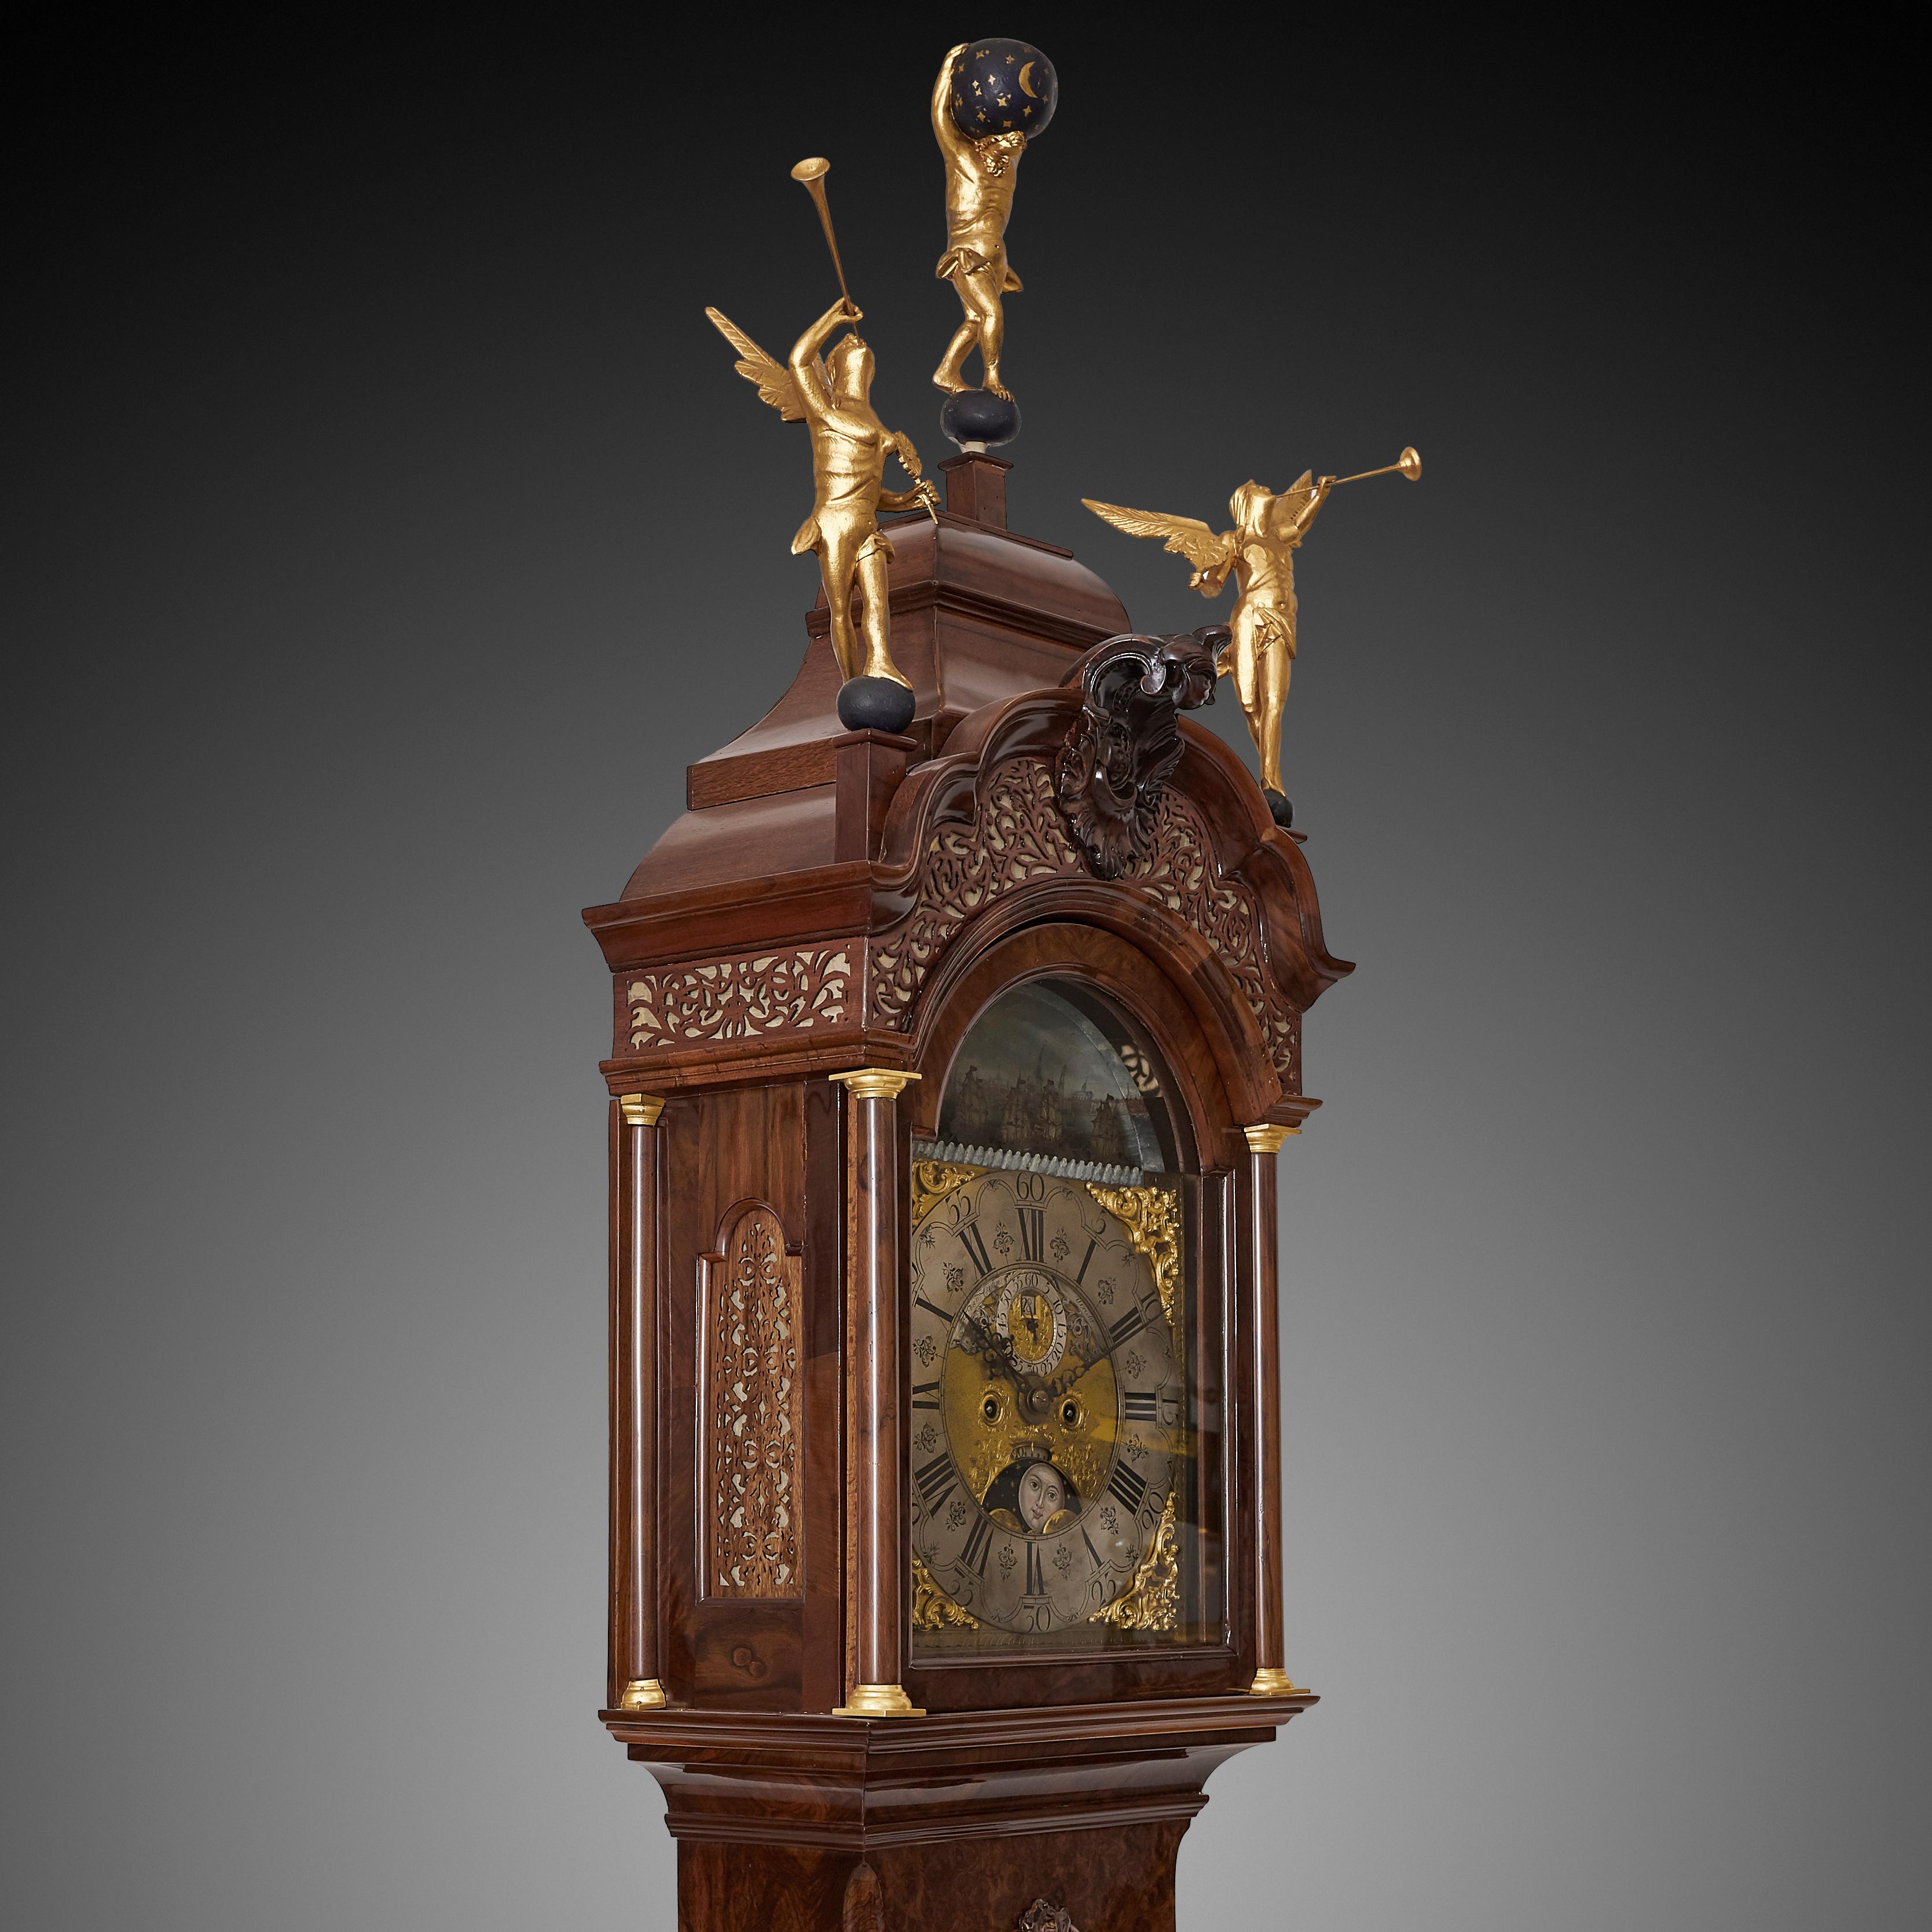 Magnificent 18th Century Striking Dutch Amsterdam Longcase Clock In Excellent Condition For Sale In Warsaw, PL